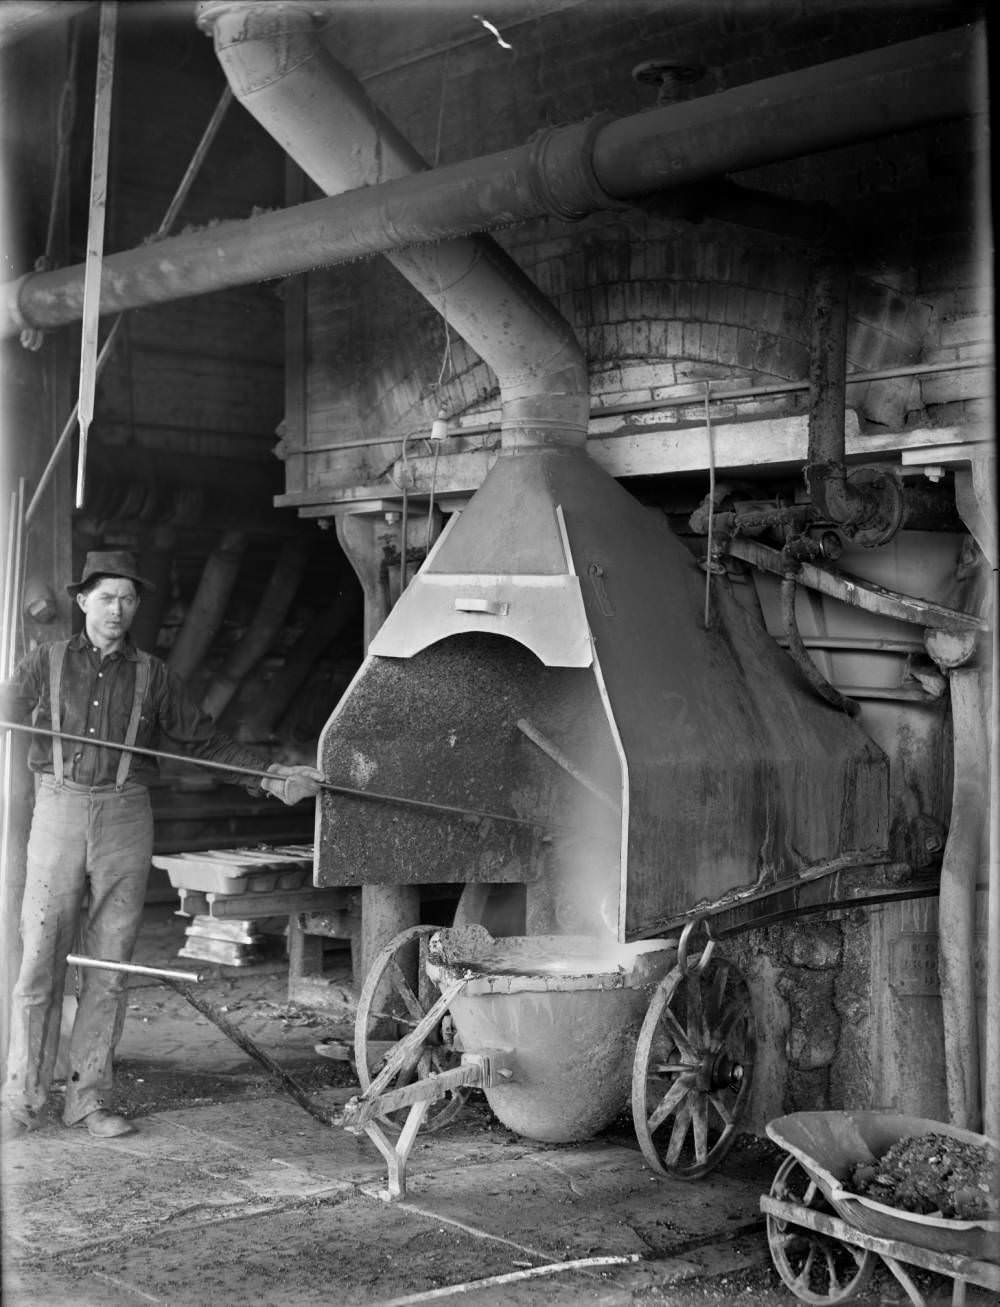 Worker at Omaha-Grant smelter in Denver drawing slag from an oven, 1900s